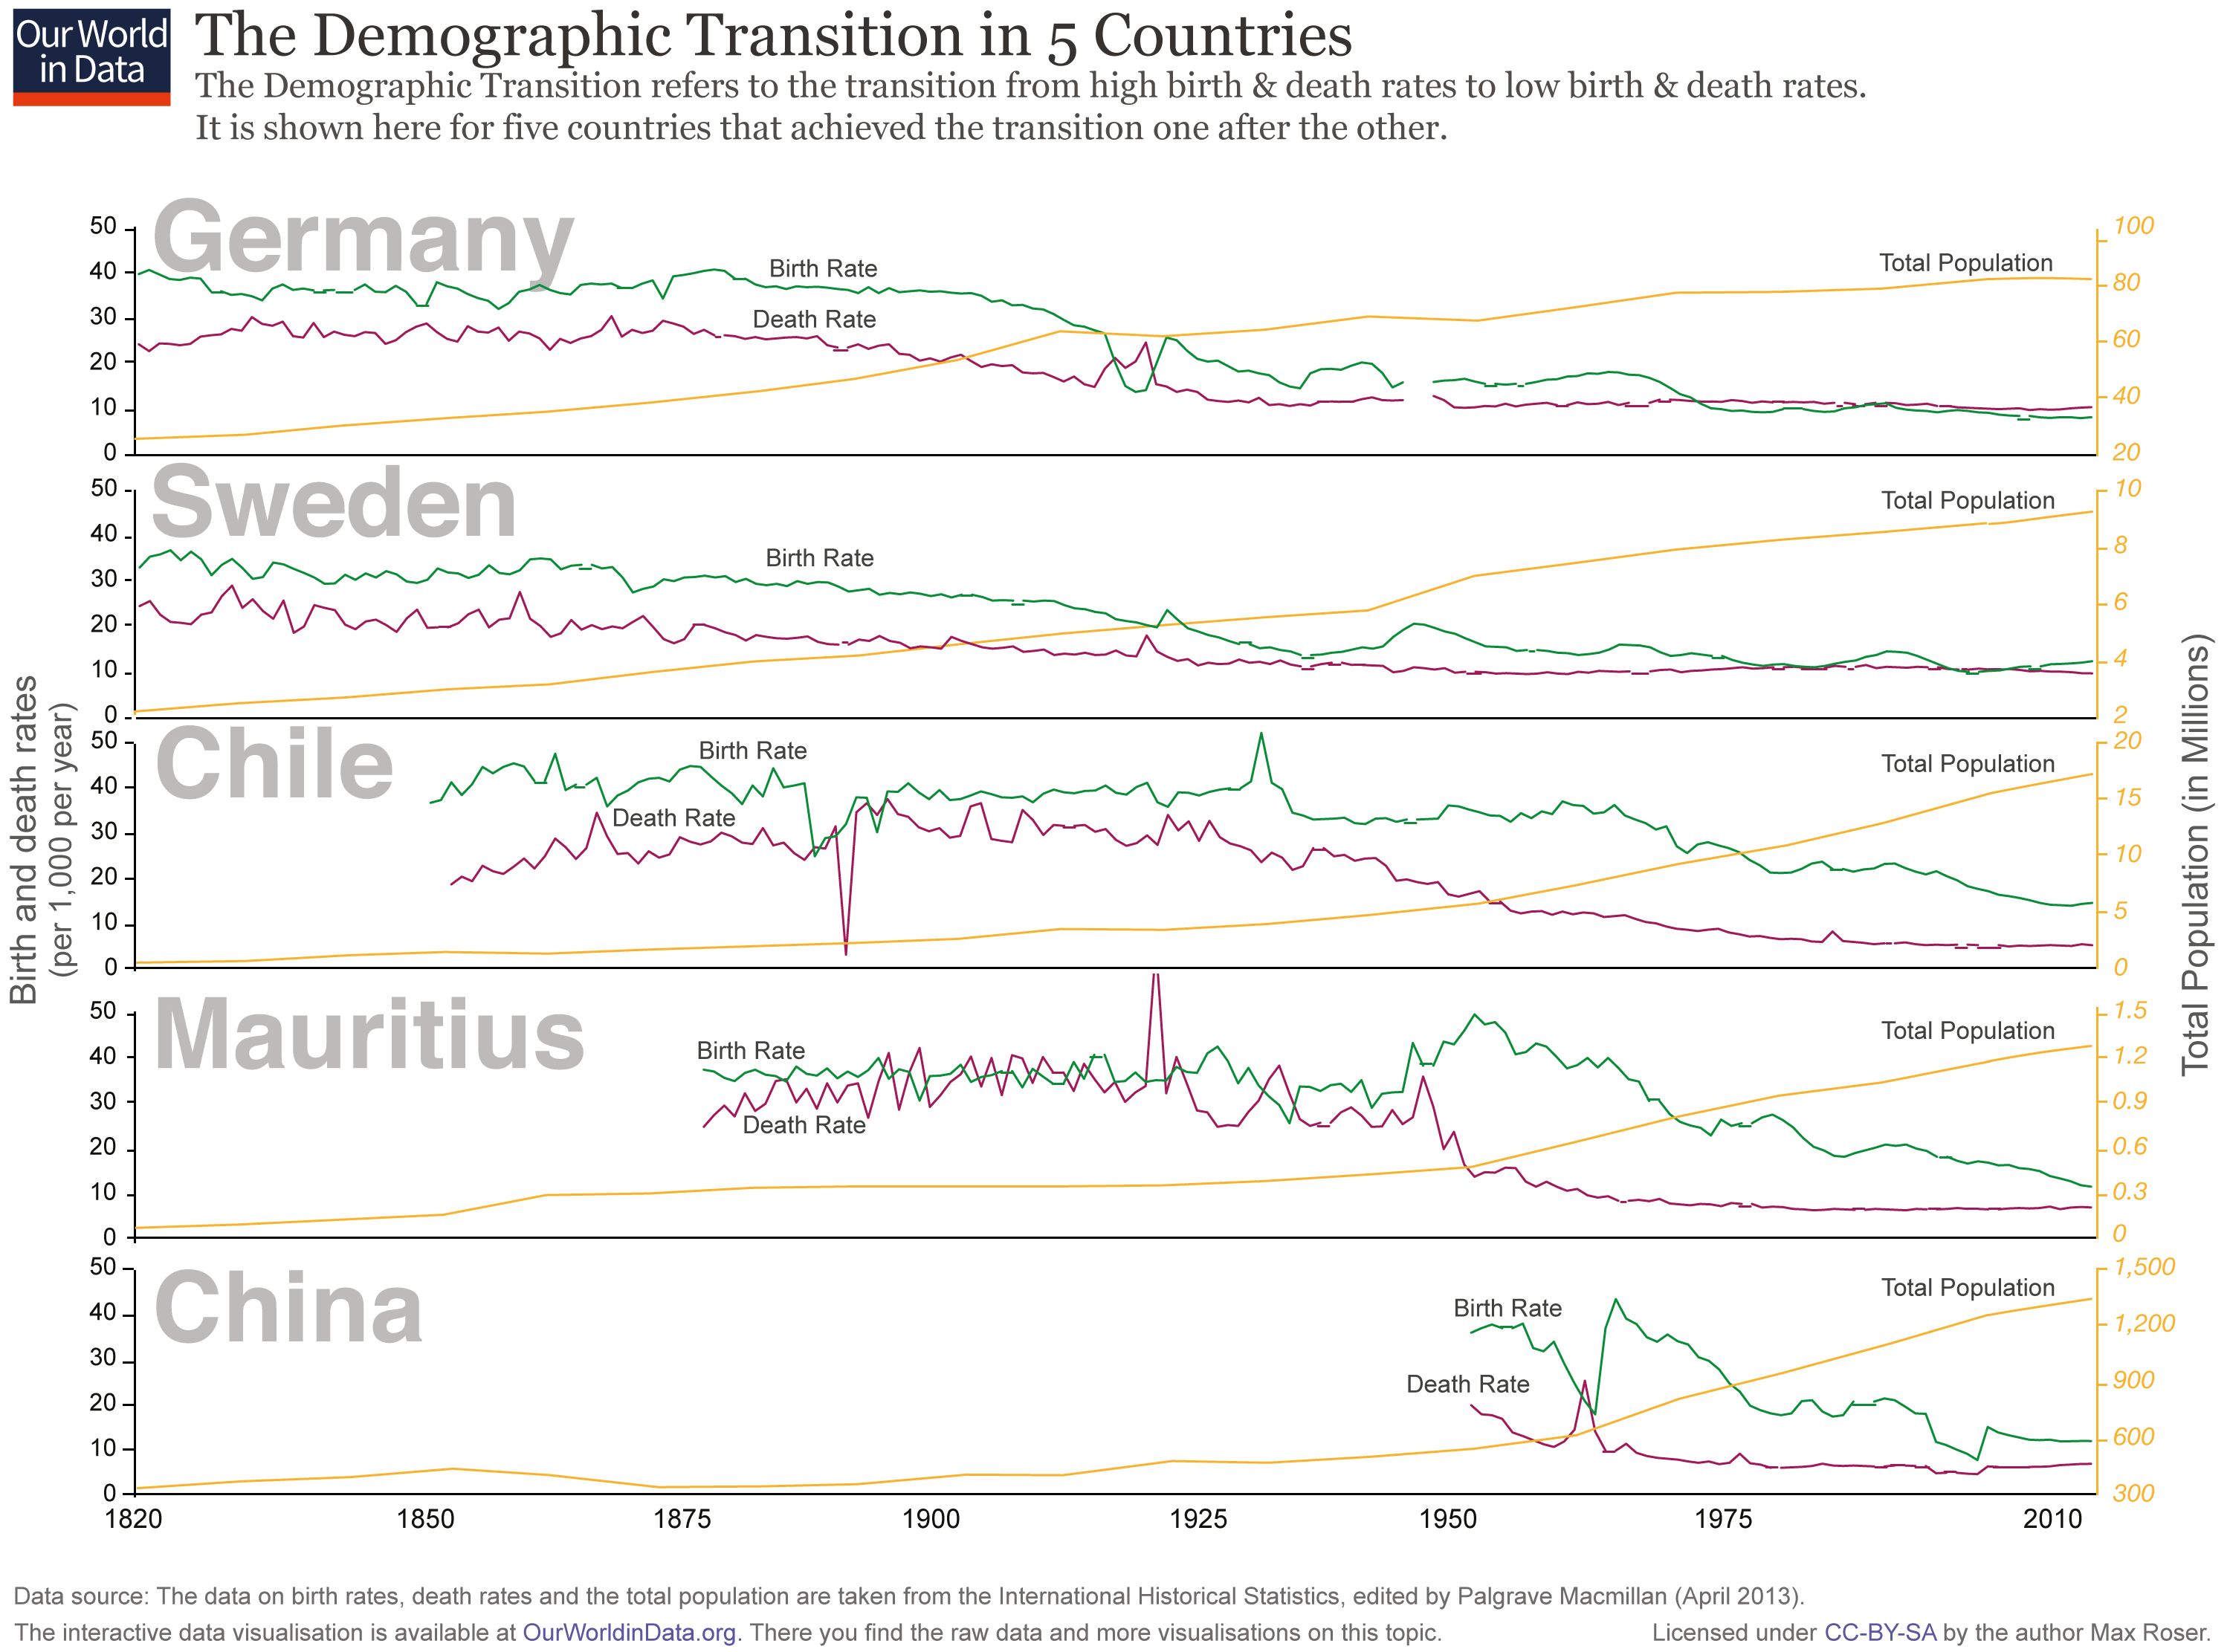 The chart shows the demographic transition (birth and death rates) in Germany, Sweden, Chile, Mauritius, and China.